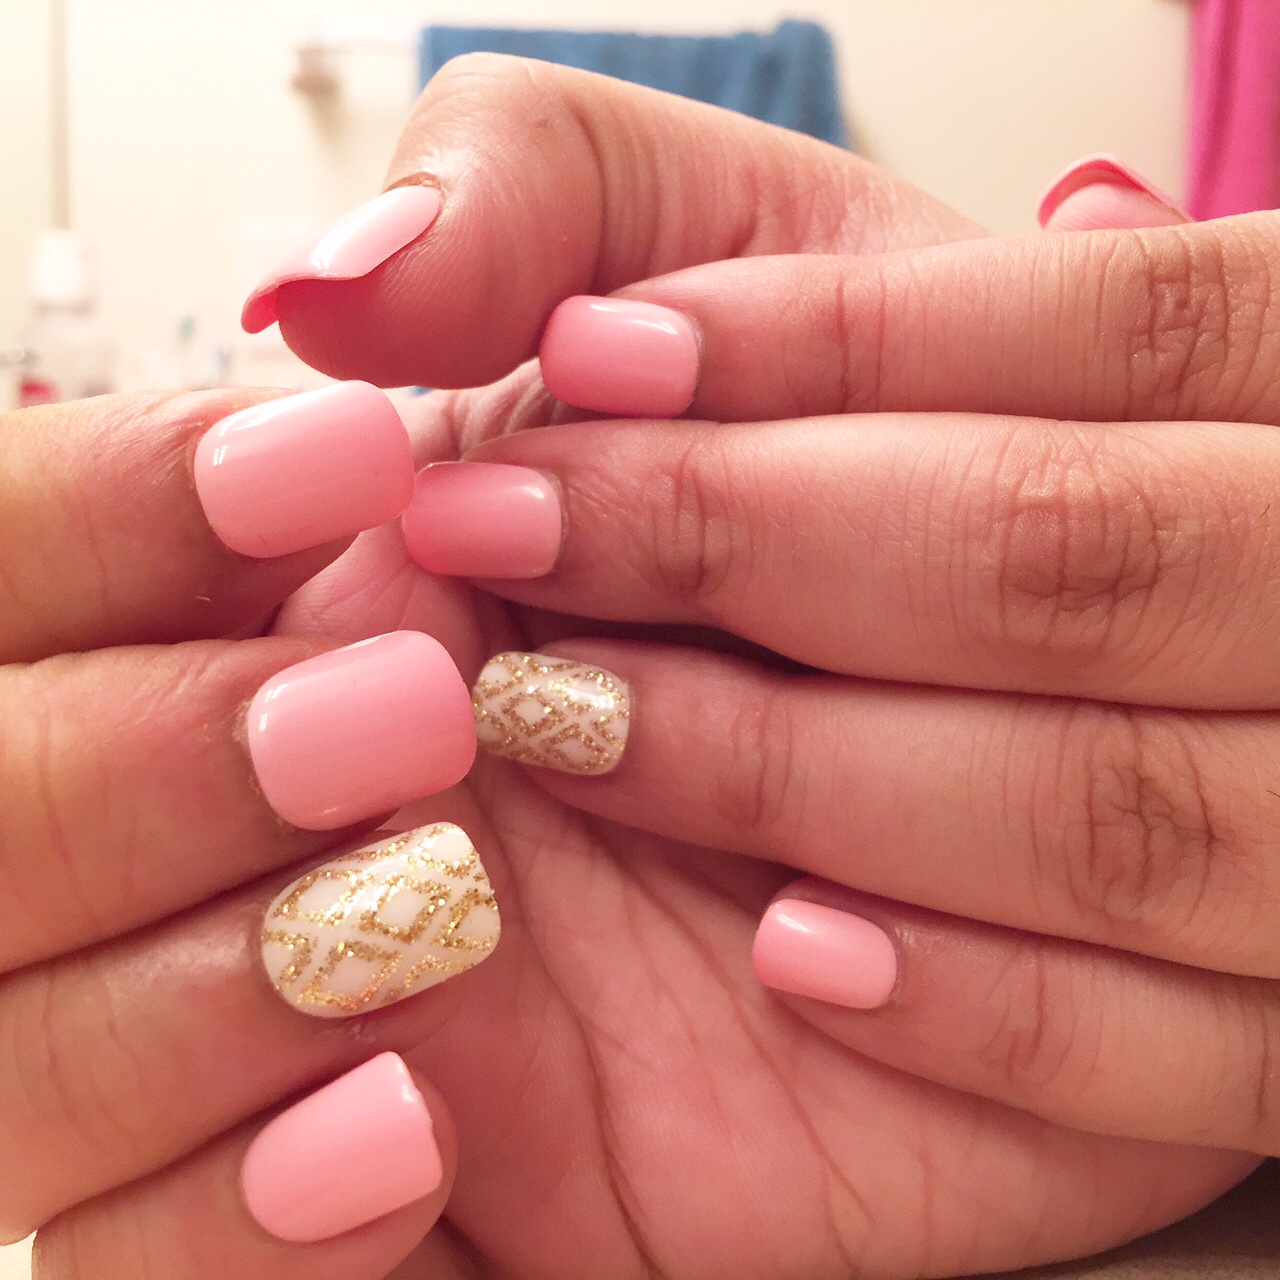 Itsy Bitsy Affairs: ImPRESS Manicure - A Salon-Quality Manicure At-home ...